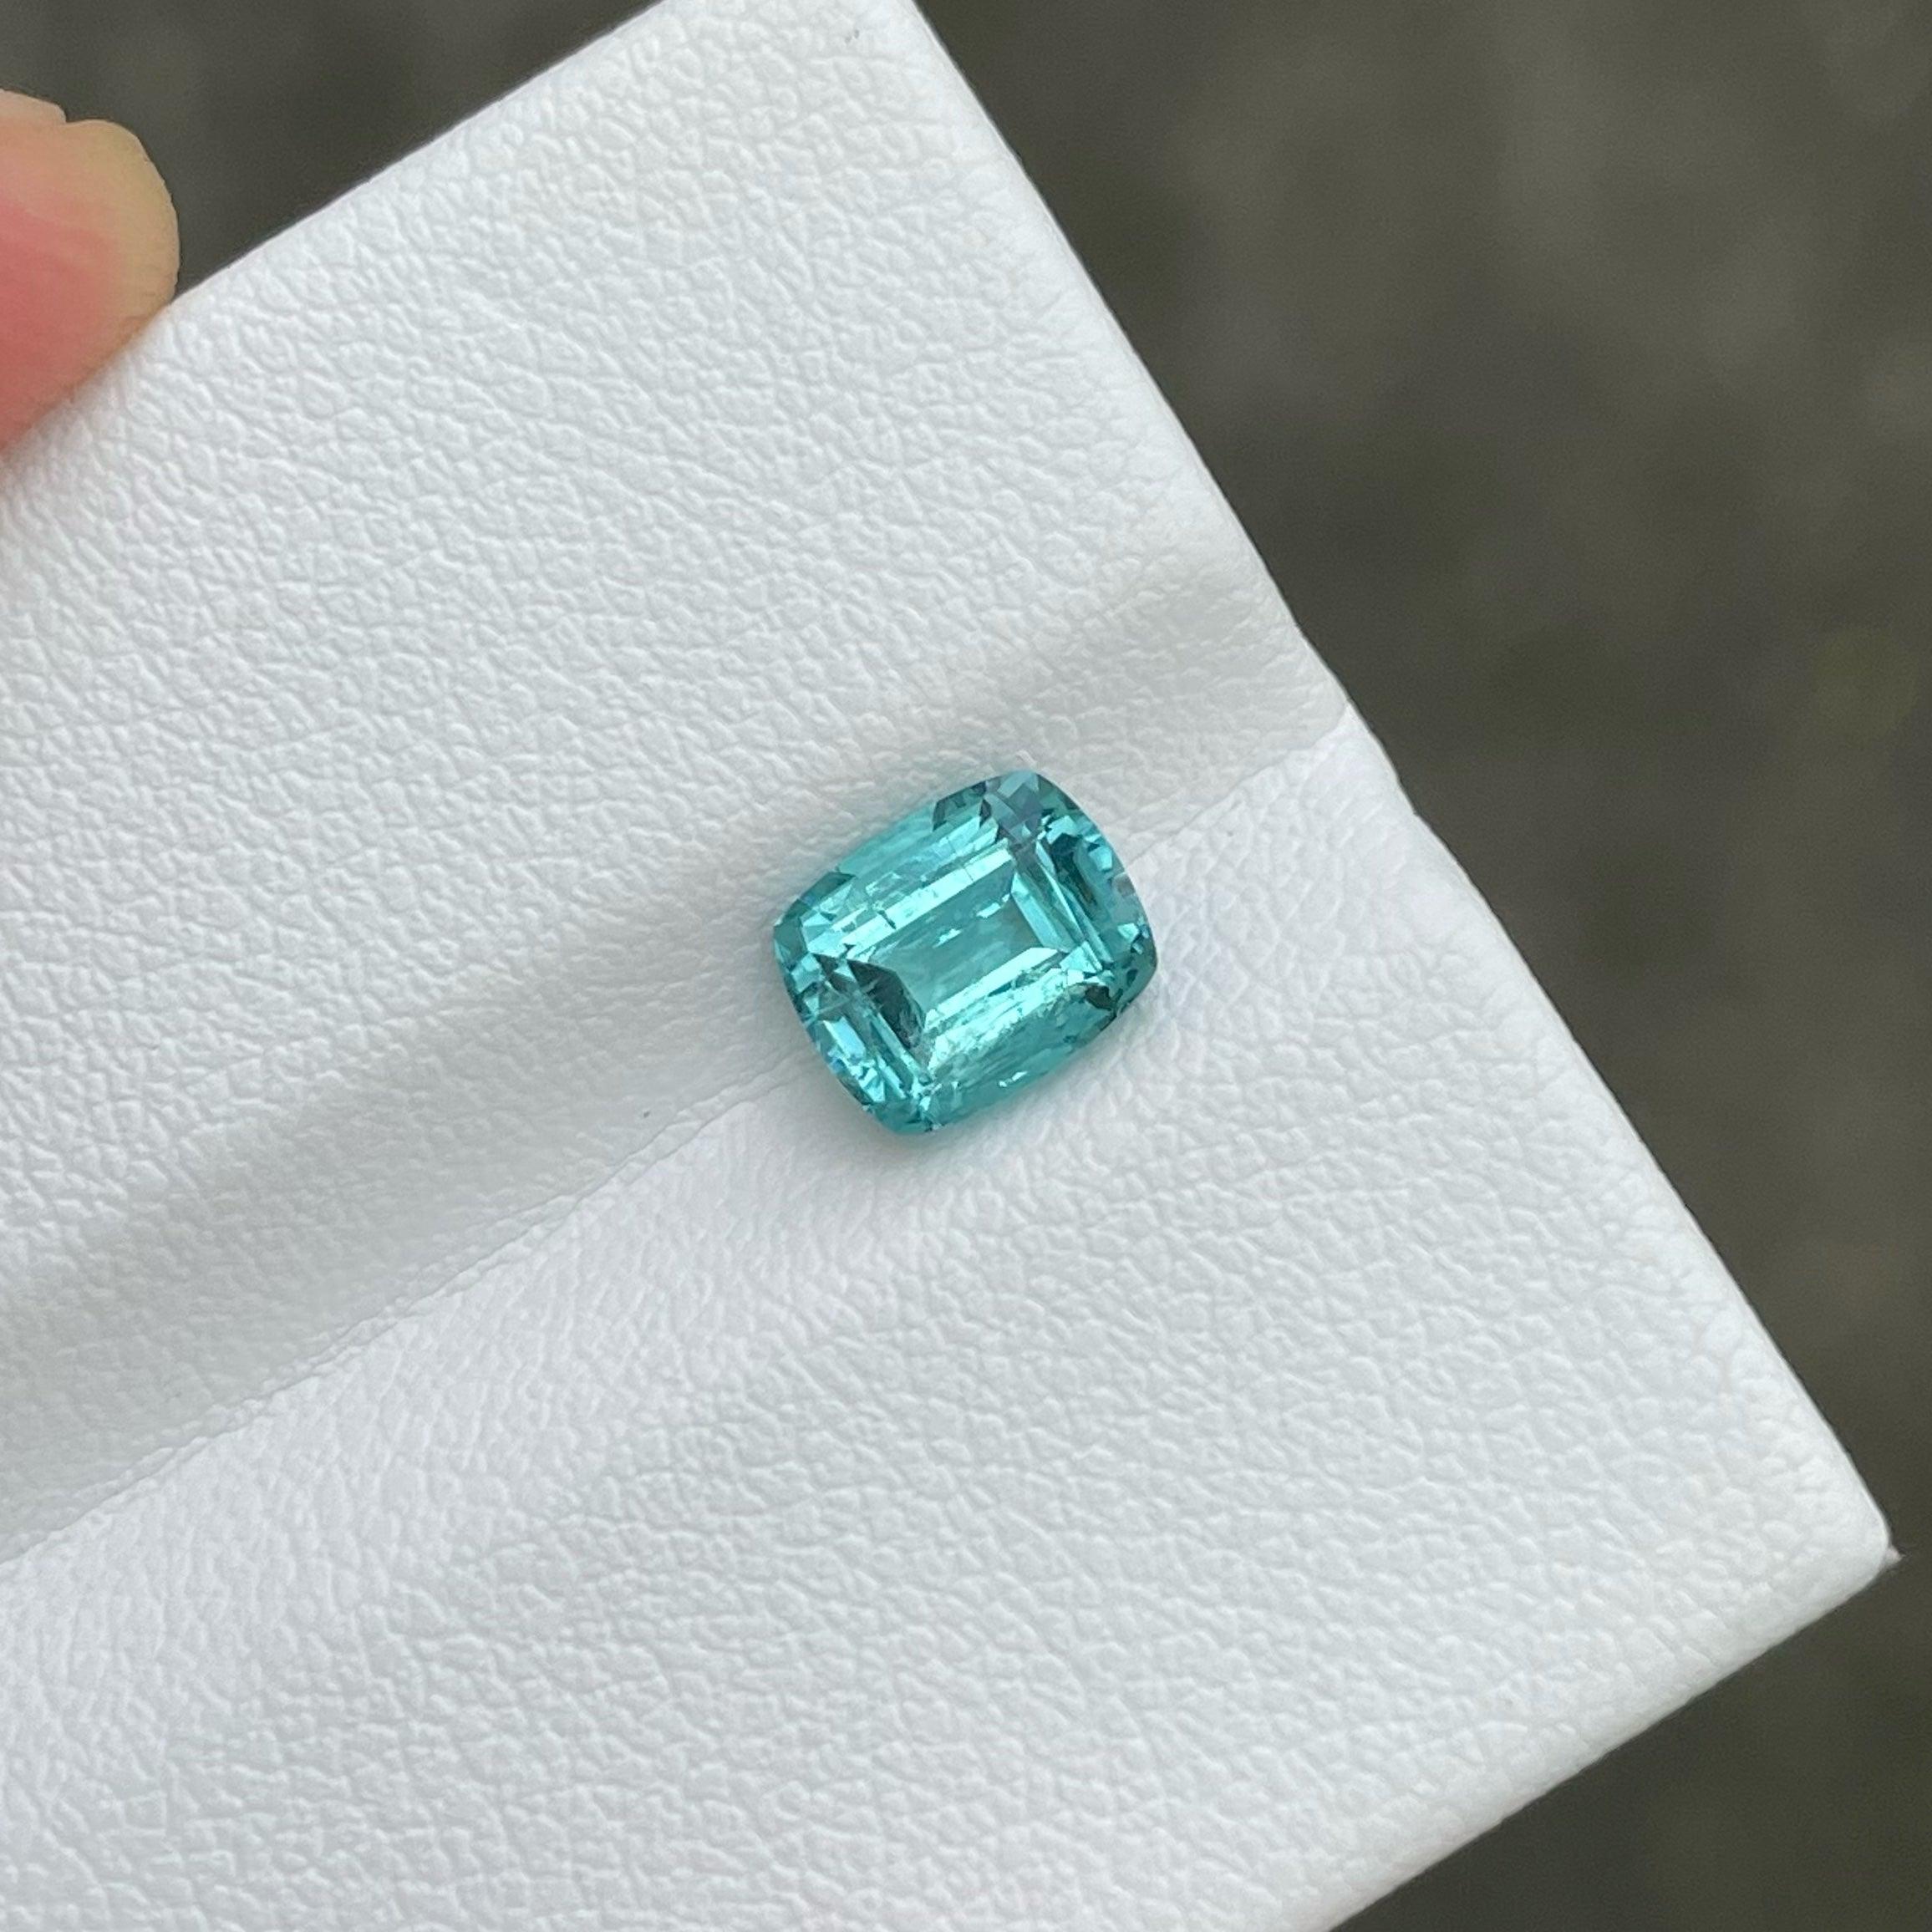 Turquoise Blue Afghan Tourmaline of 1.65 carats from Afghanistan has a wonderful cut in a Cushion shape, incredible Blue color. Great brilliance. This gem is  SI Clarity.

Product Information:
GEMSTONE TYPE:	Turquoise Blue Afghan